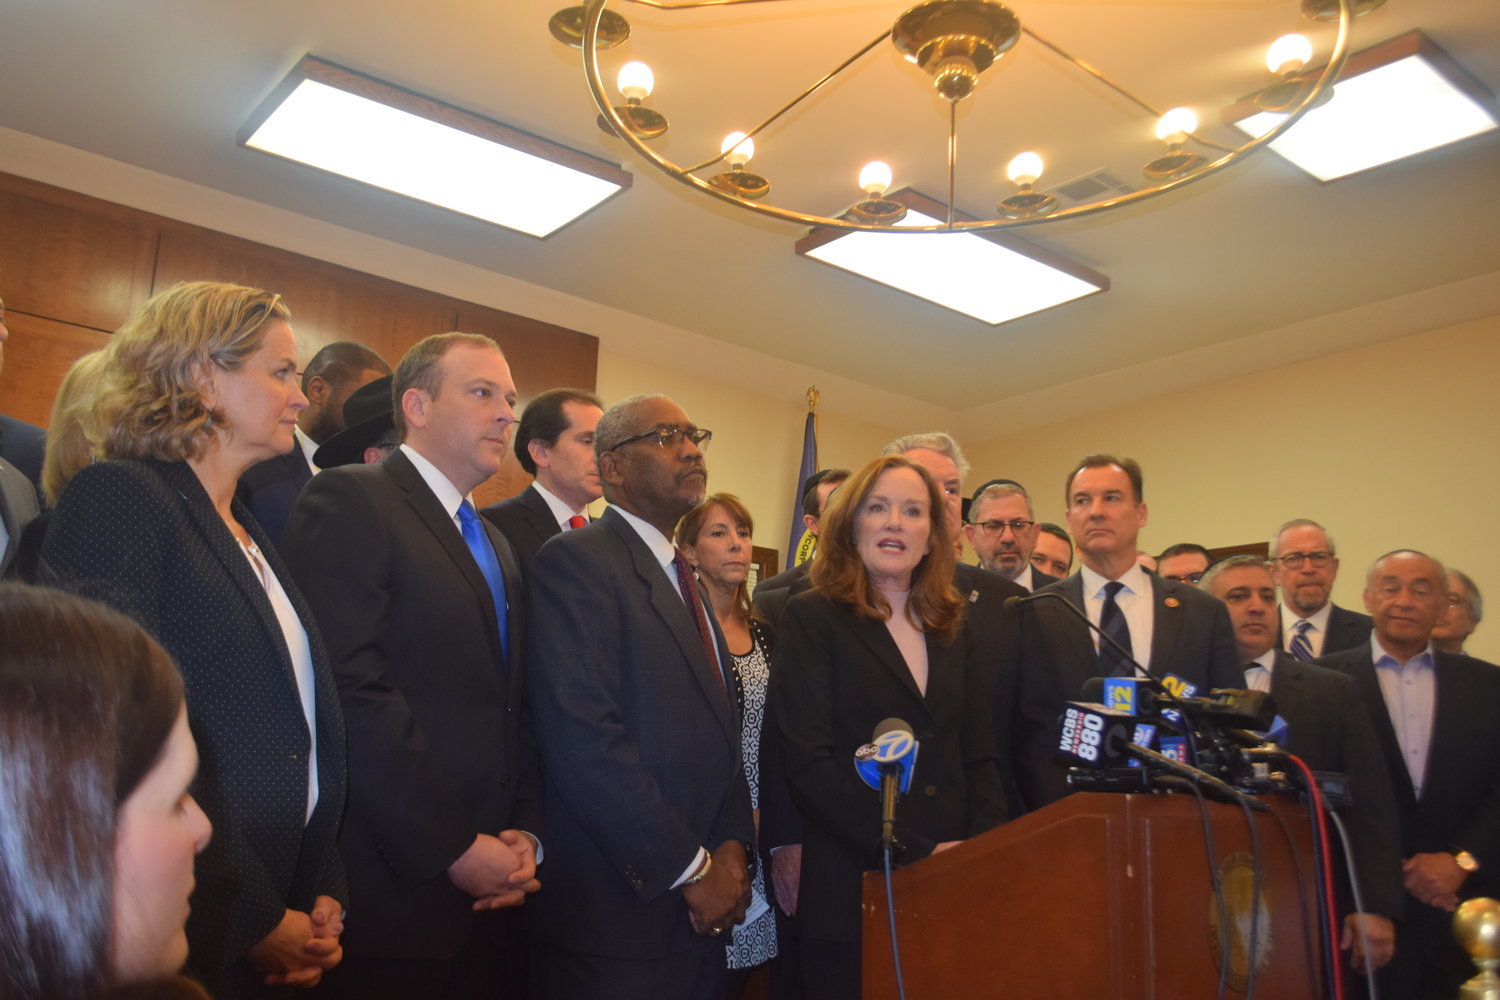 Elected officials and religious leaders gathered on Jan. 3 to denounce acts of anti-Semitism in the metropolitan area last month.